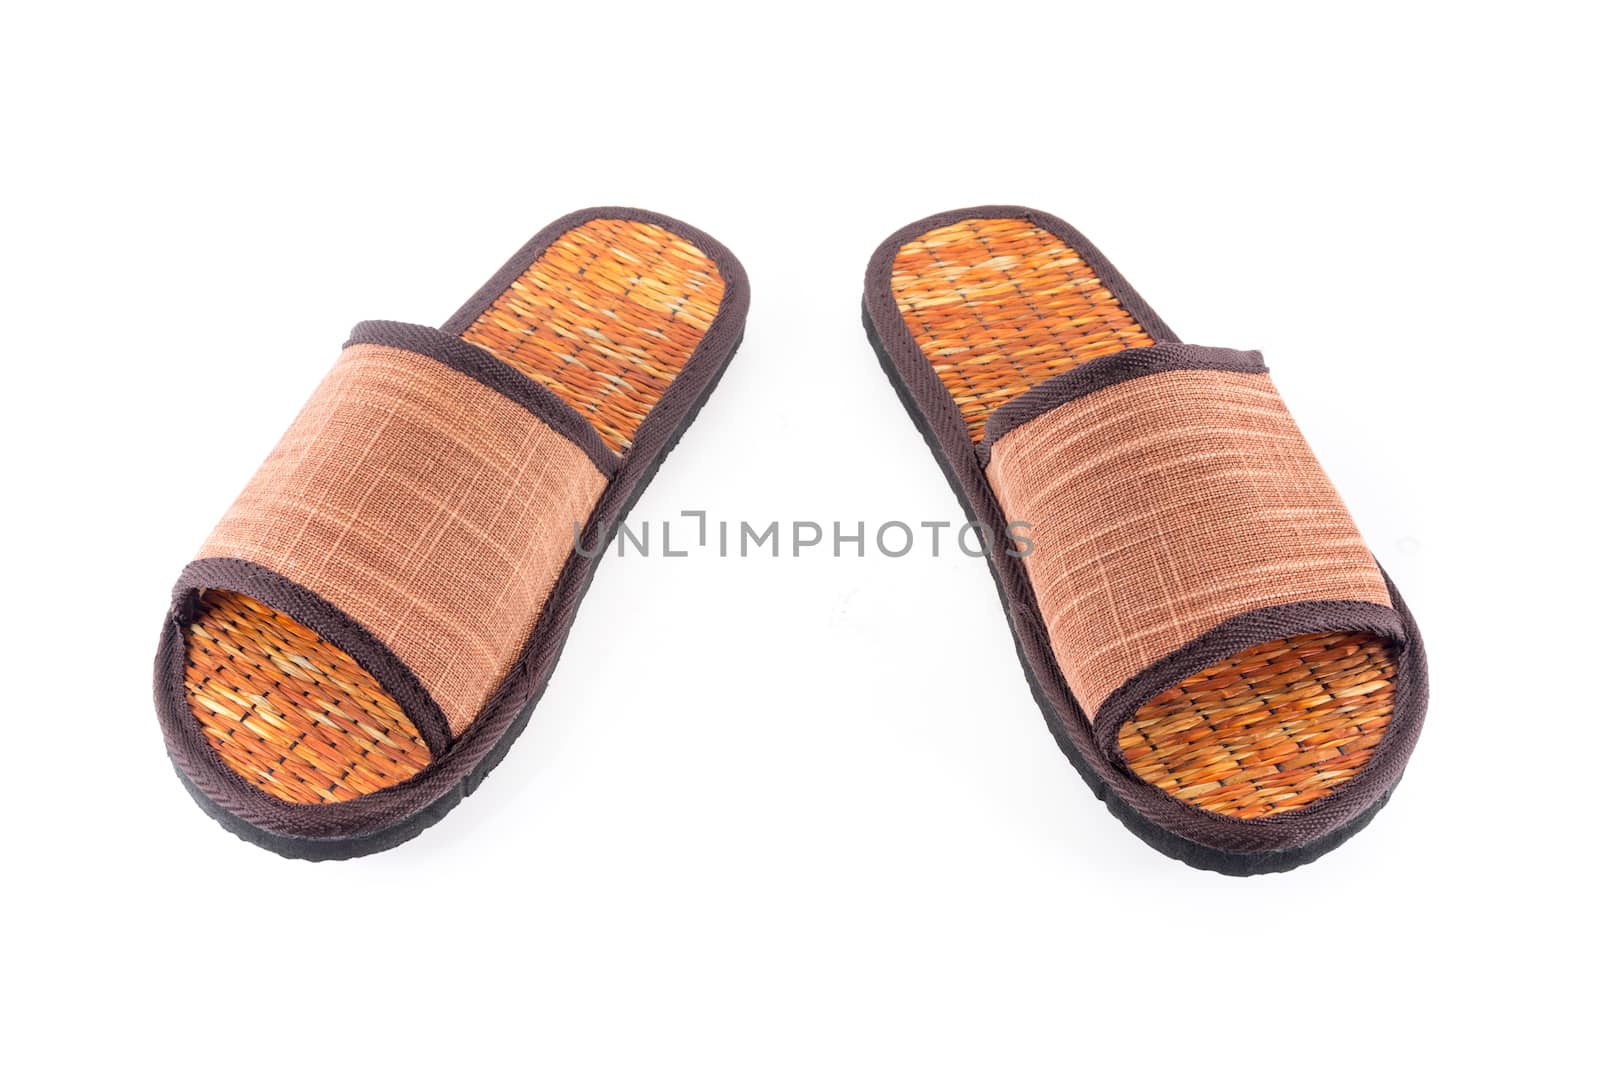 Thai Sandal made from reed plant by iamway